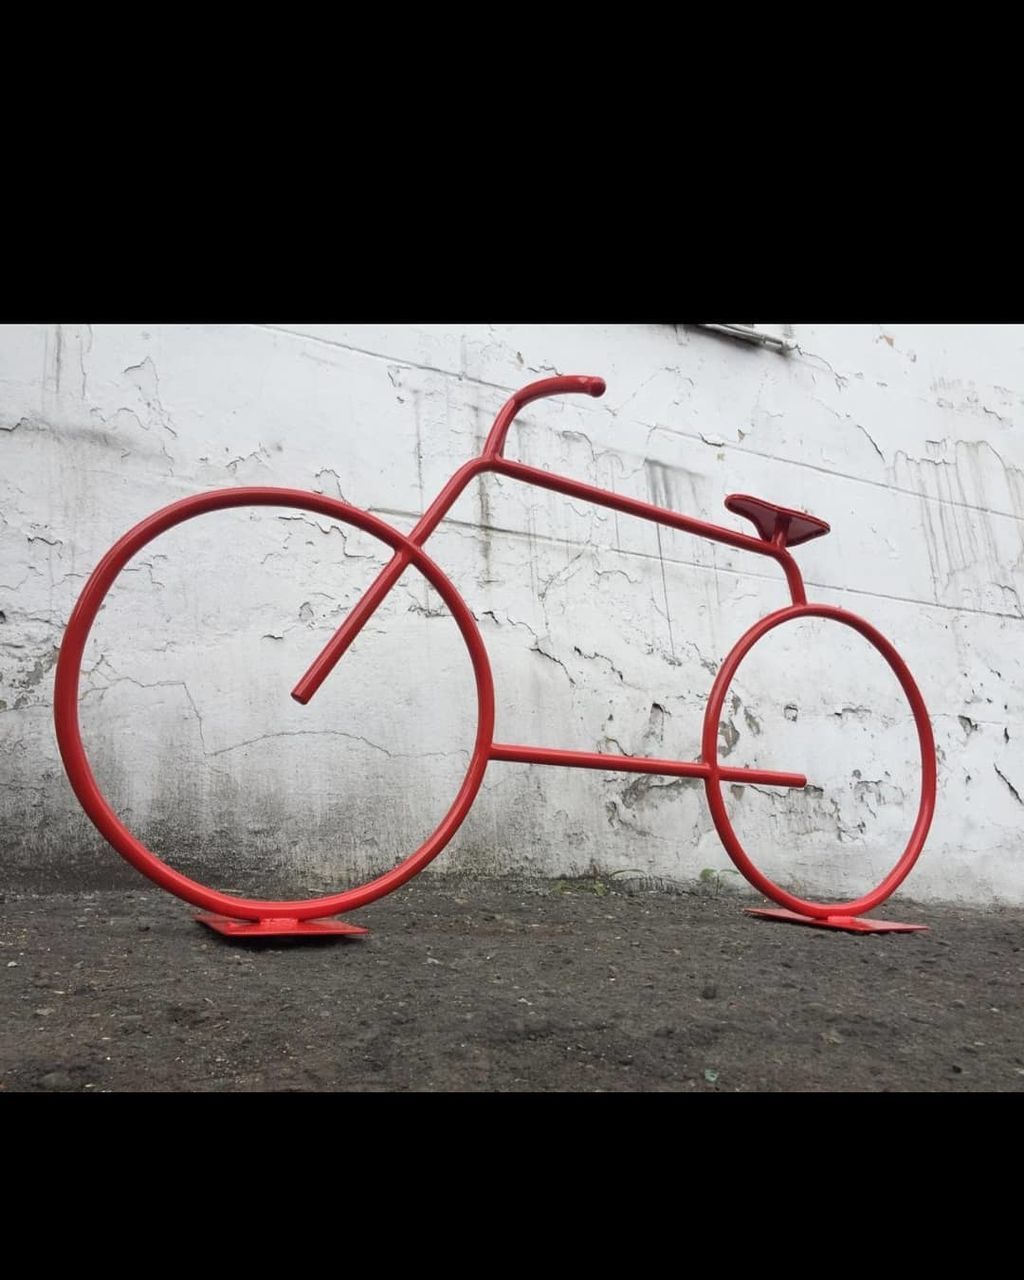 font, circle, glasses, no people, red, iron, bicycle, indoors, number, text, line